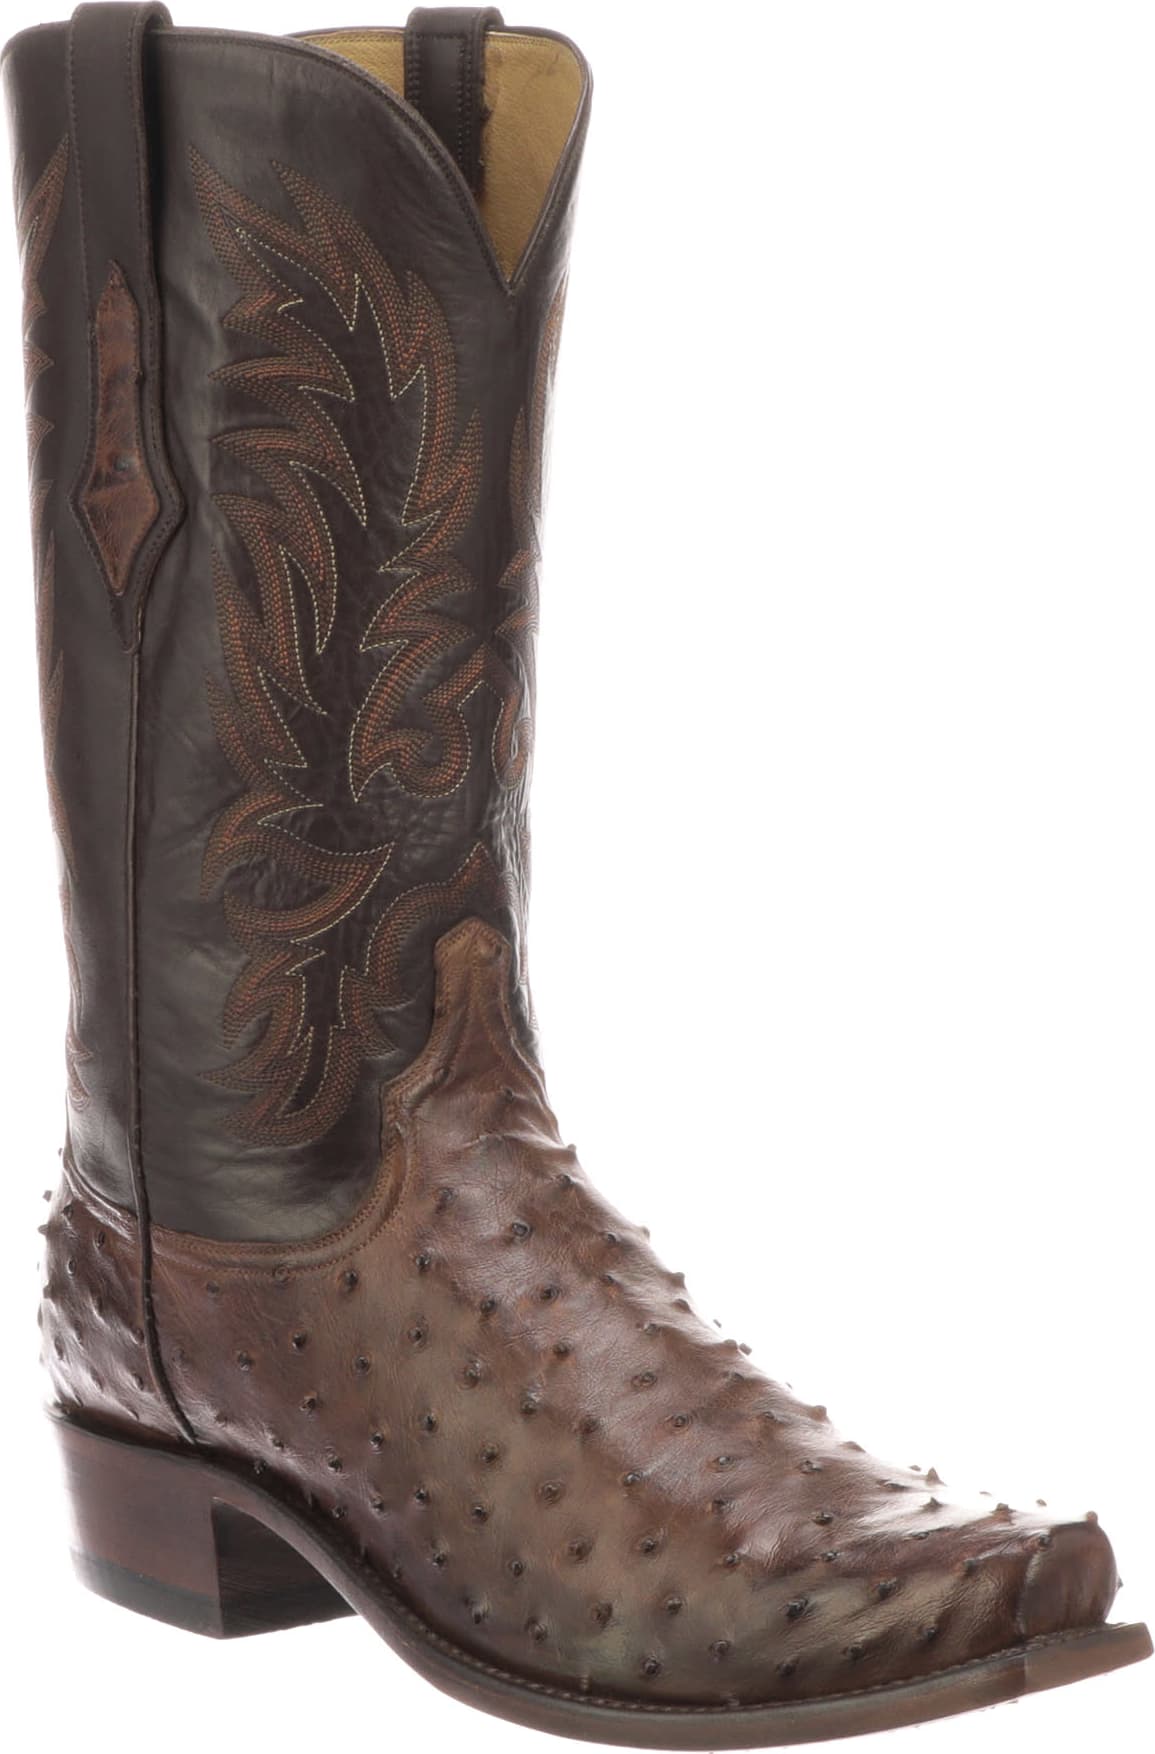 MEN’S LUCCHESE ELGIN - ANTIQUE CHOCOLATE FULL QUILL OSTRICH BOOTS - El Toro Boots